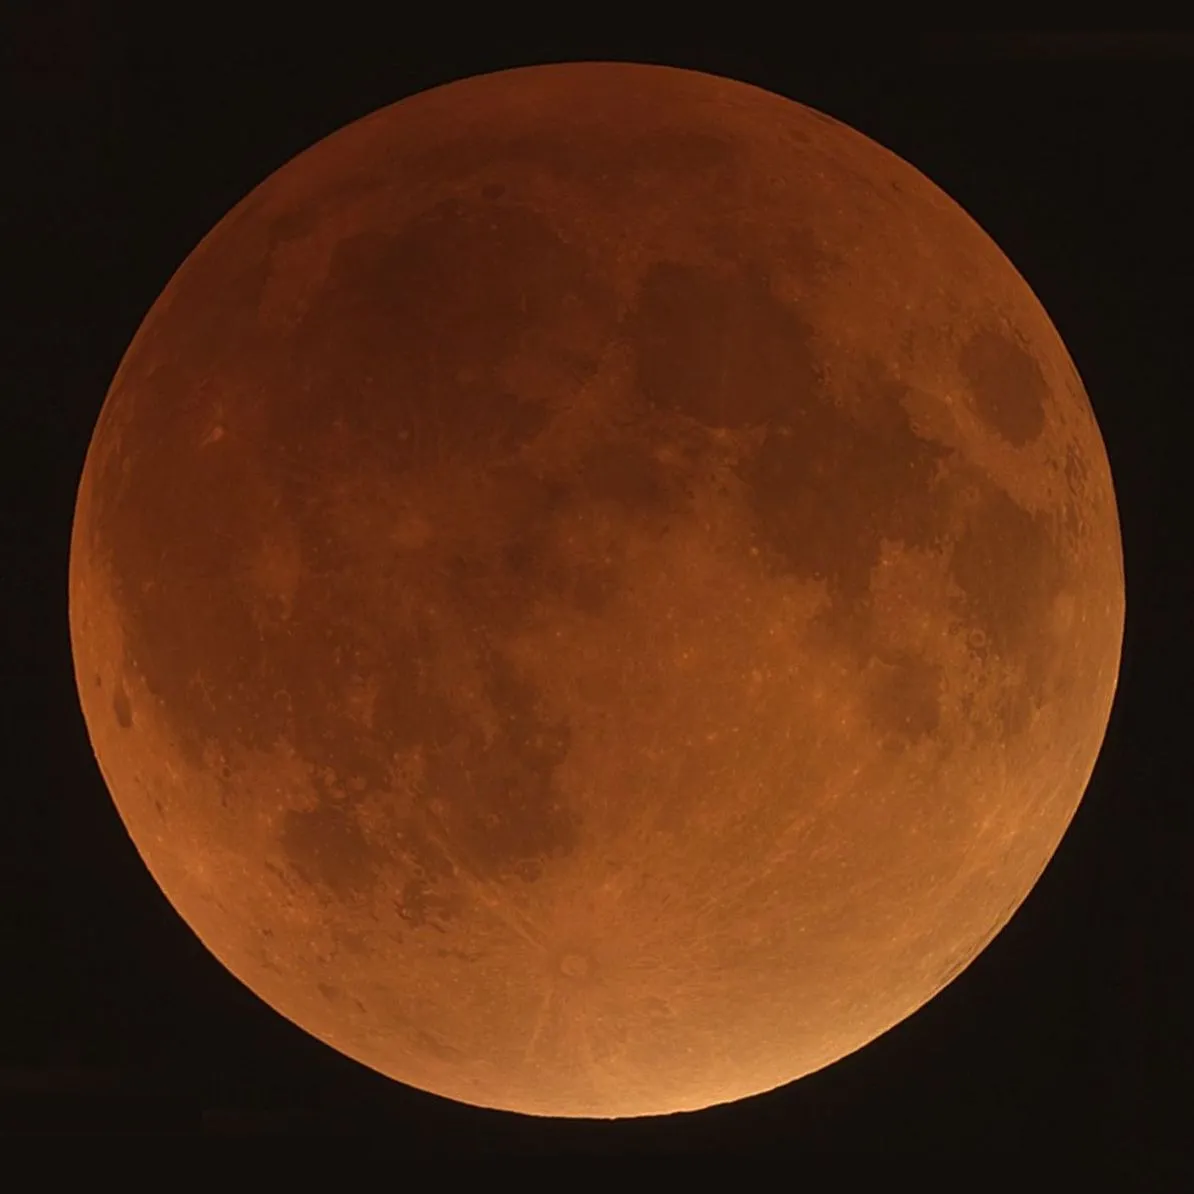 Lunar Eclipse (28/09/2015) by Mark Griffith, Swindon, Wiltshire, UK.